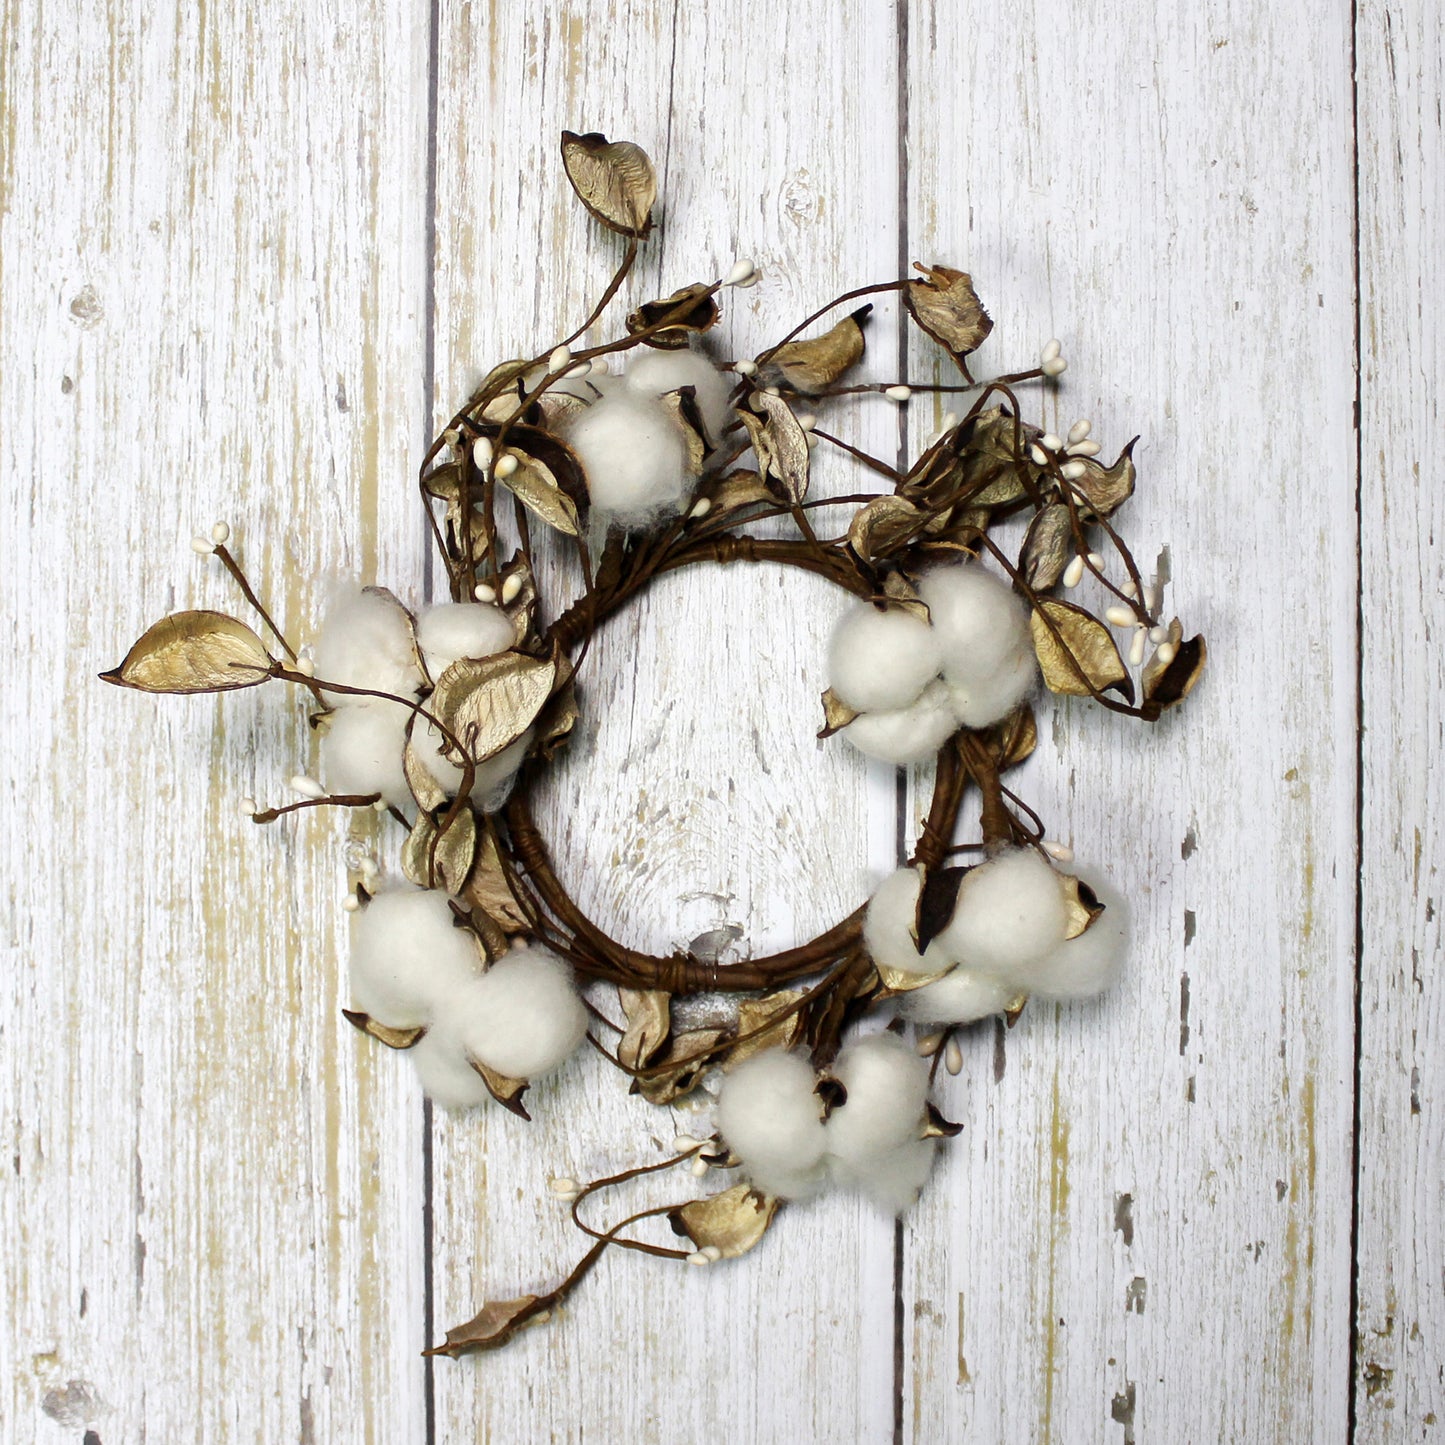 CVHOMEDECO. Primitives Rustic Cotton Pod Pip Berries with Autumn Leaves Wreath, 8 Inch